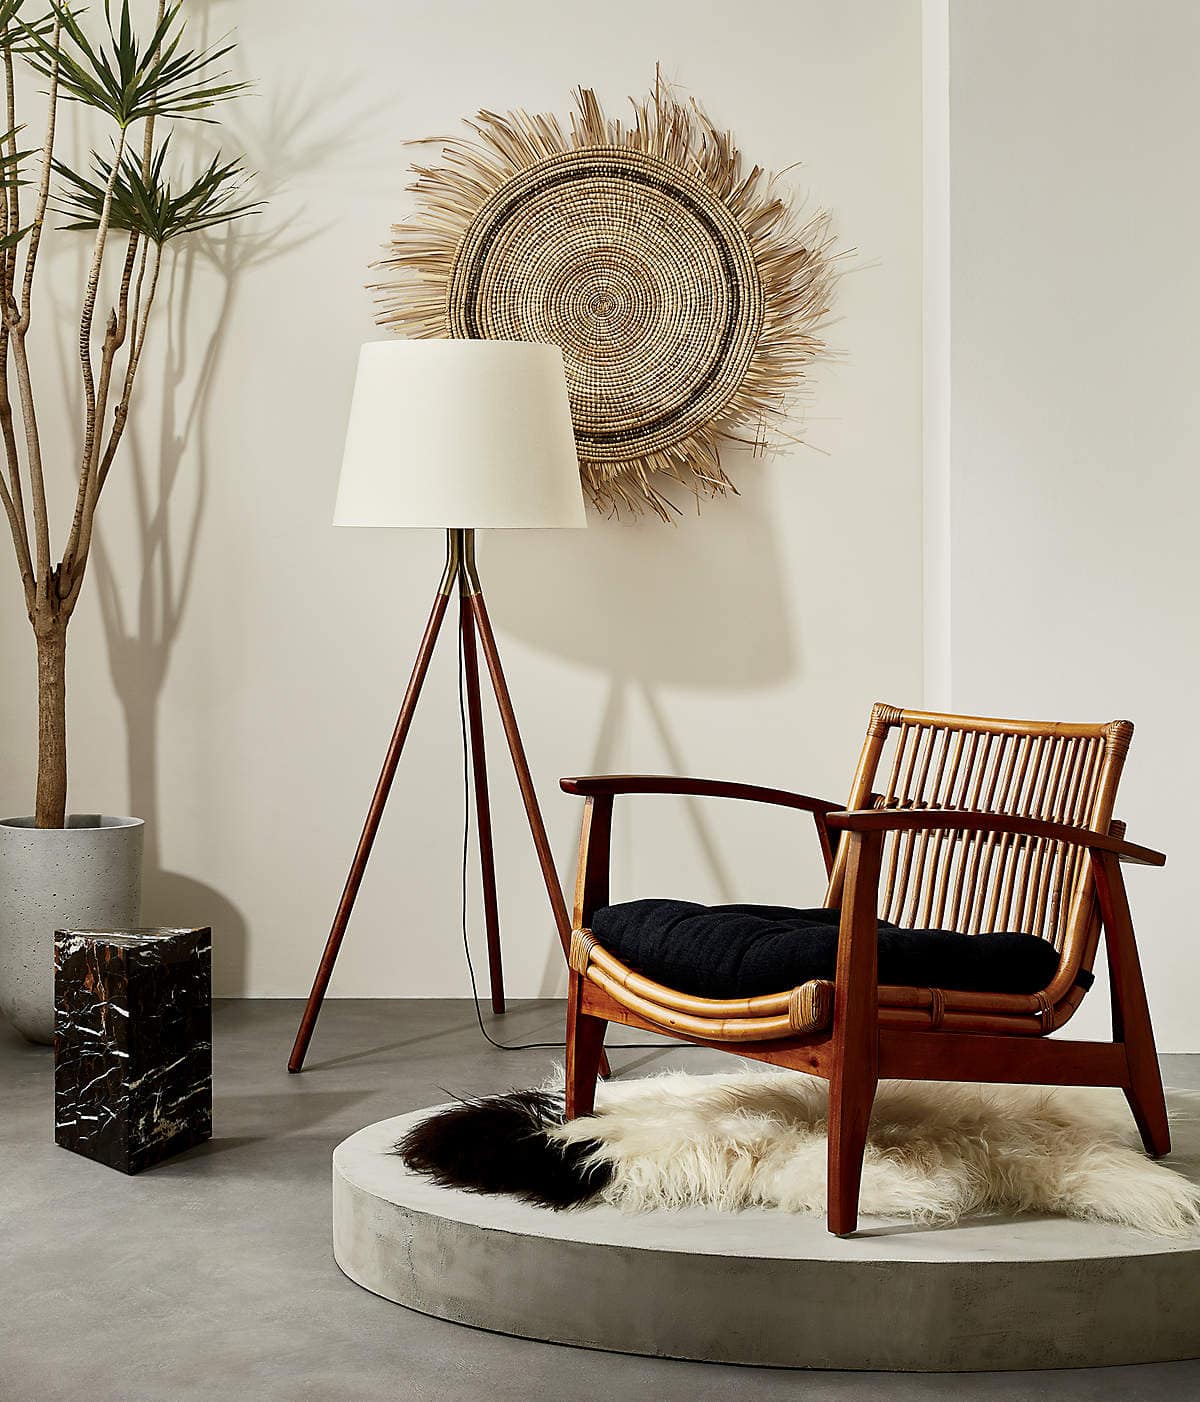 Make a Statement with a Small Boho Accent Chair